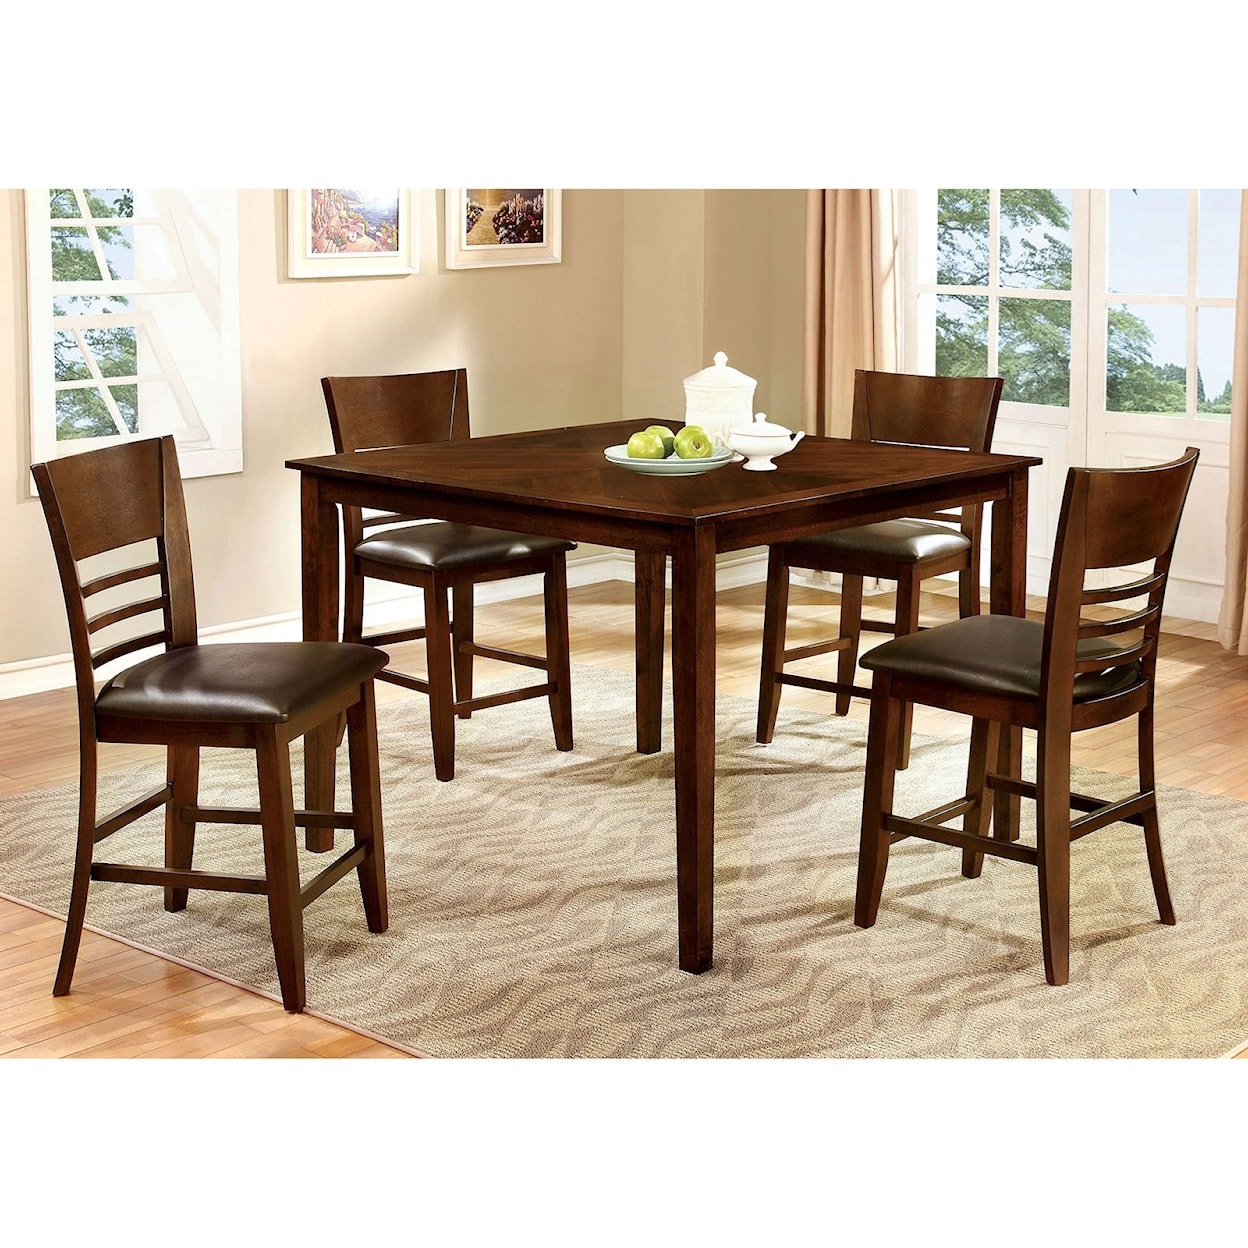 FUSA Hillsview Counter Height Table Set